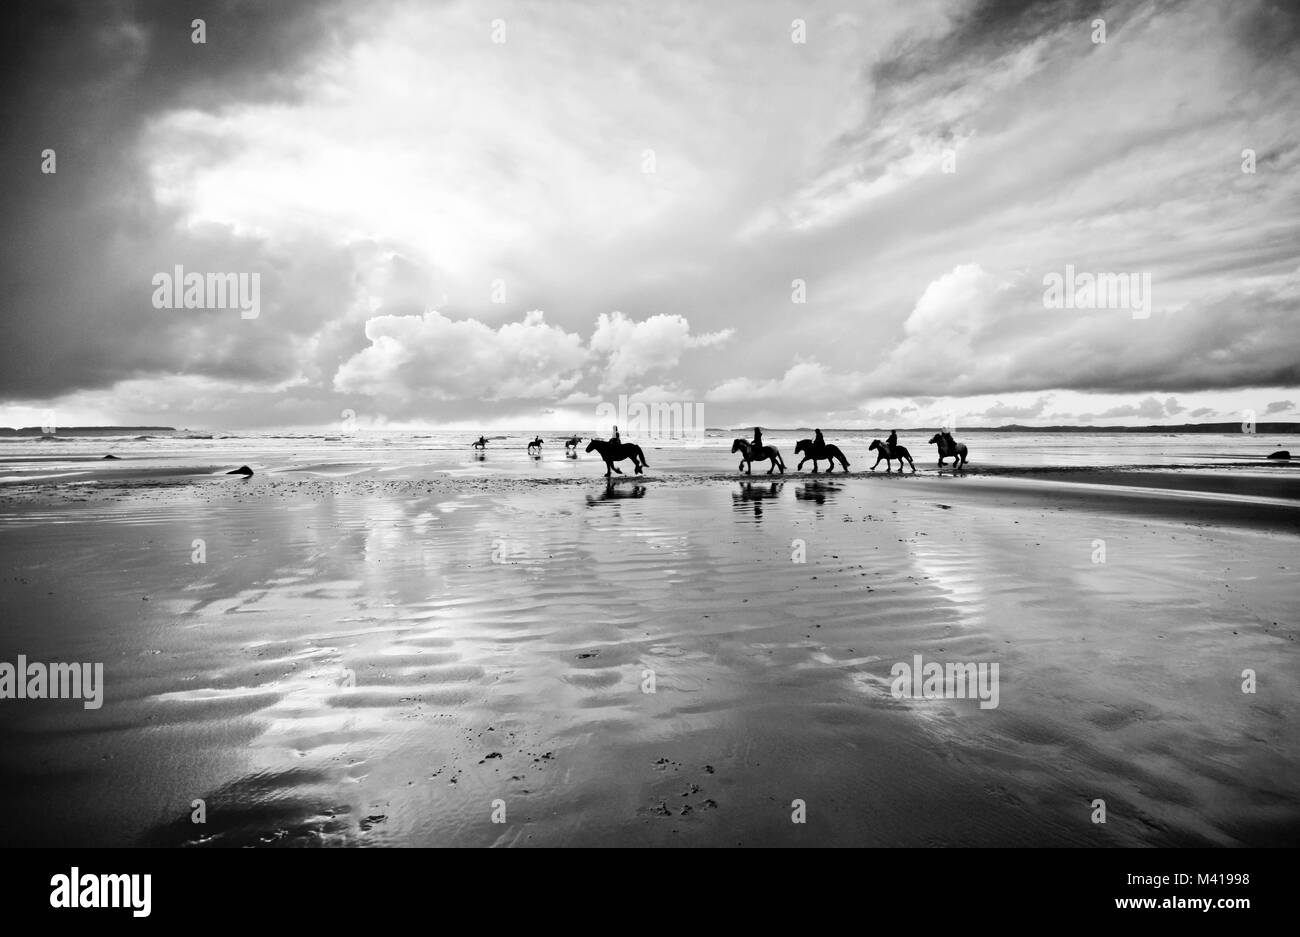 horse riding on a beach at low tide with a dramatic sky. In black and white Stock Photo